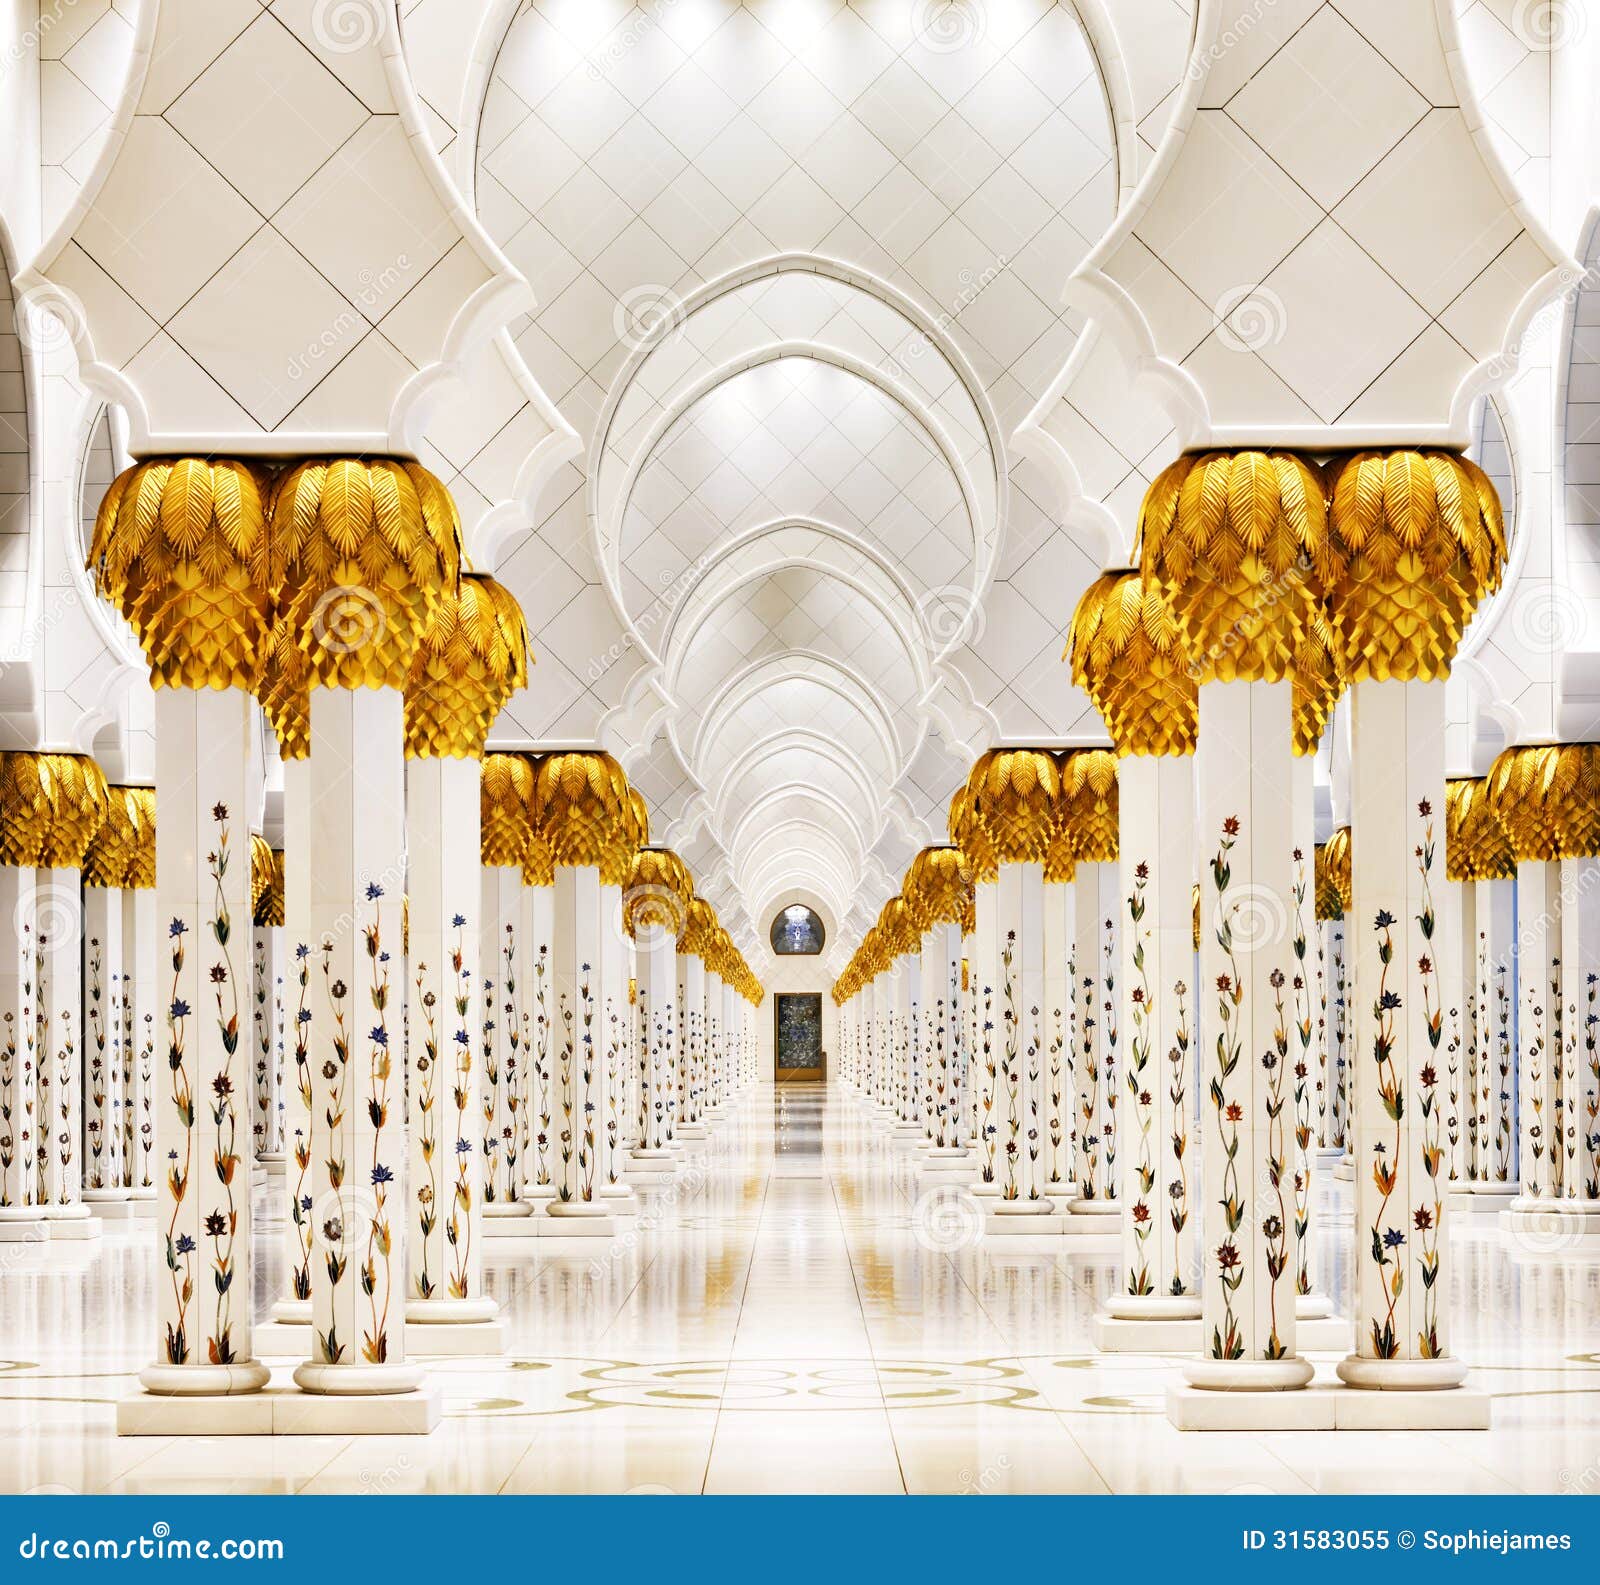 sheikh zayed grand mosque, abu dhabi is the largest in the uae